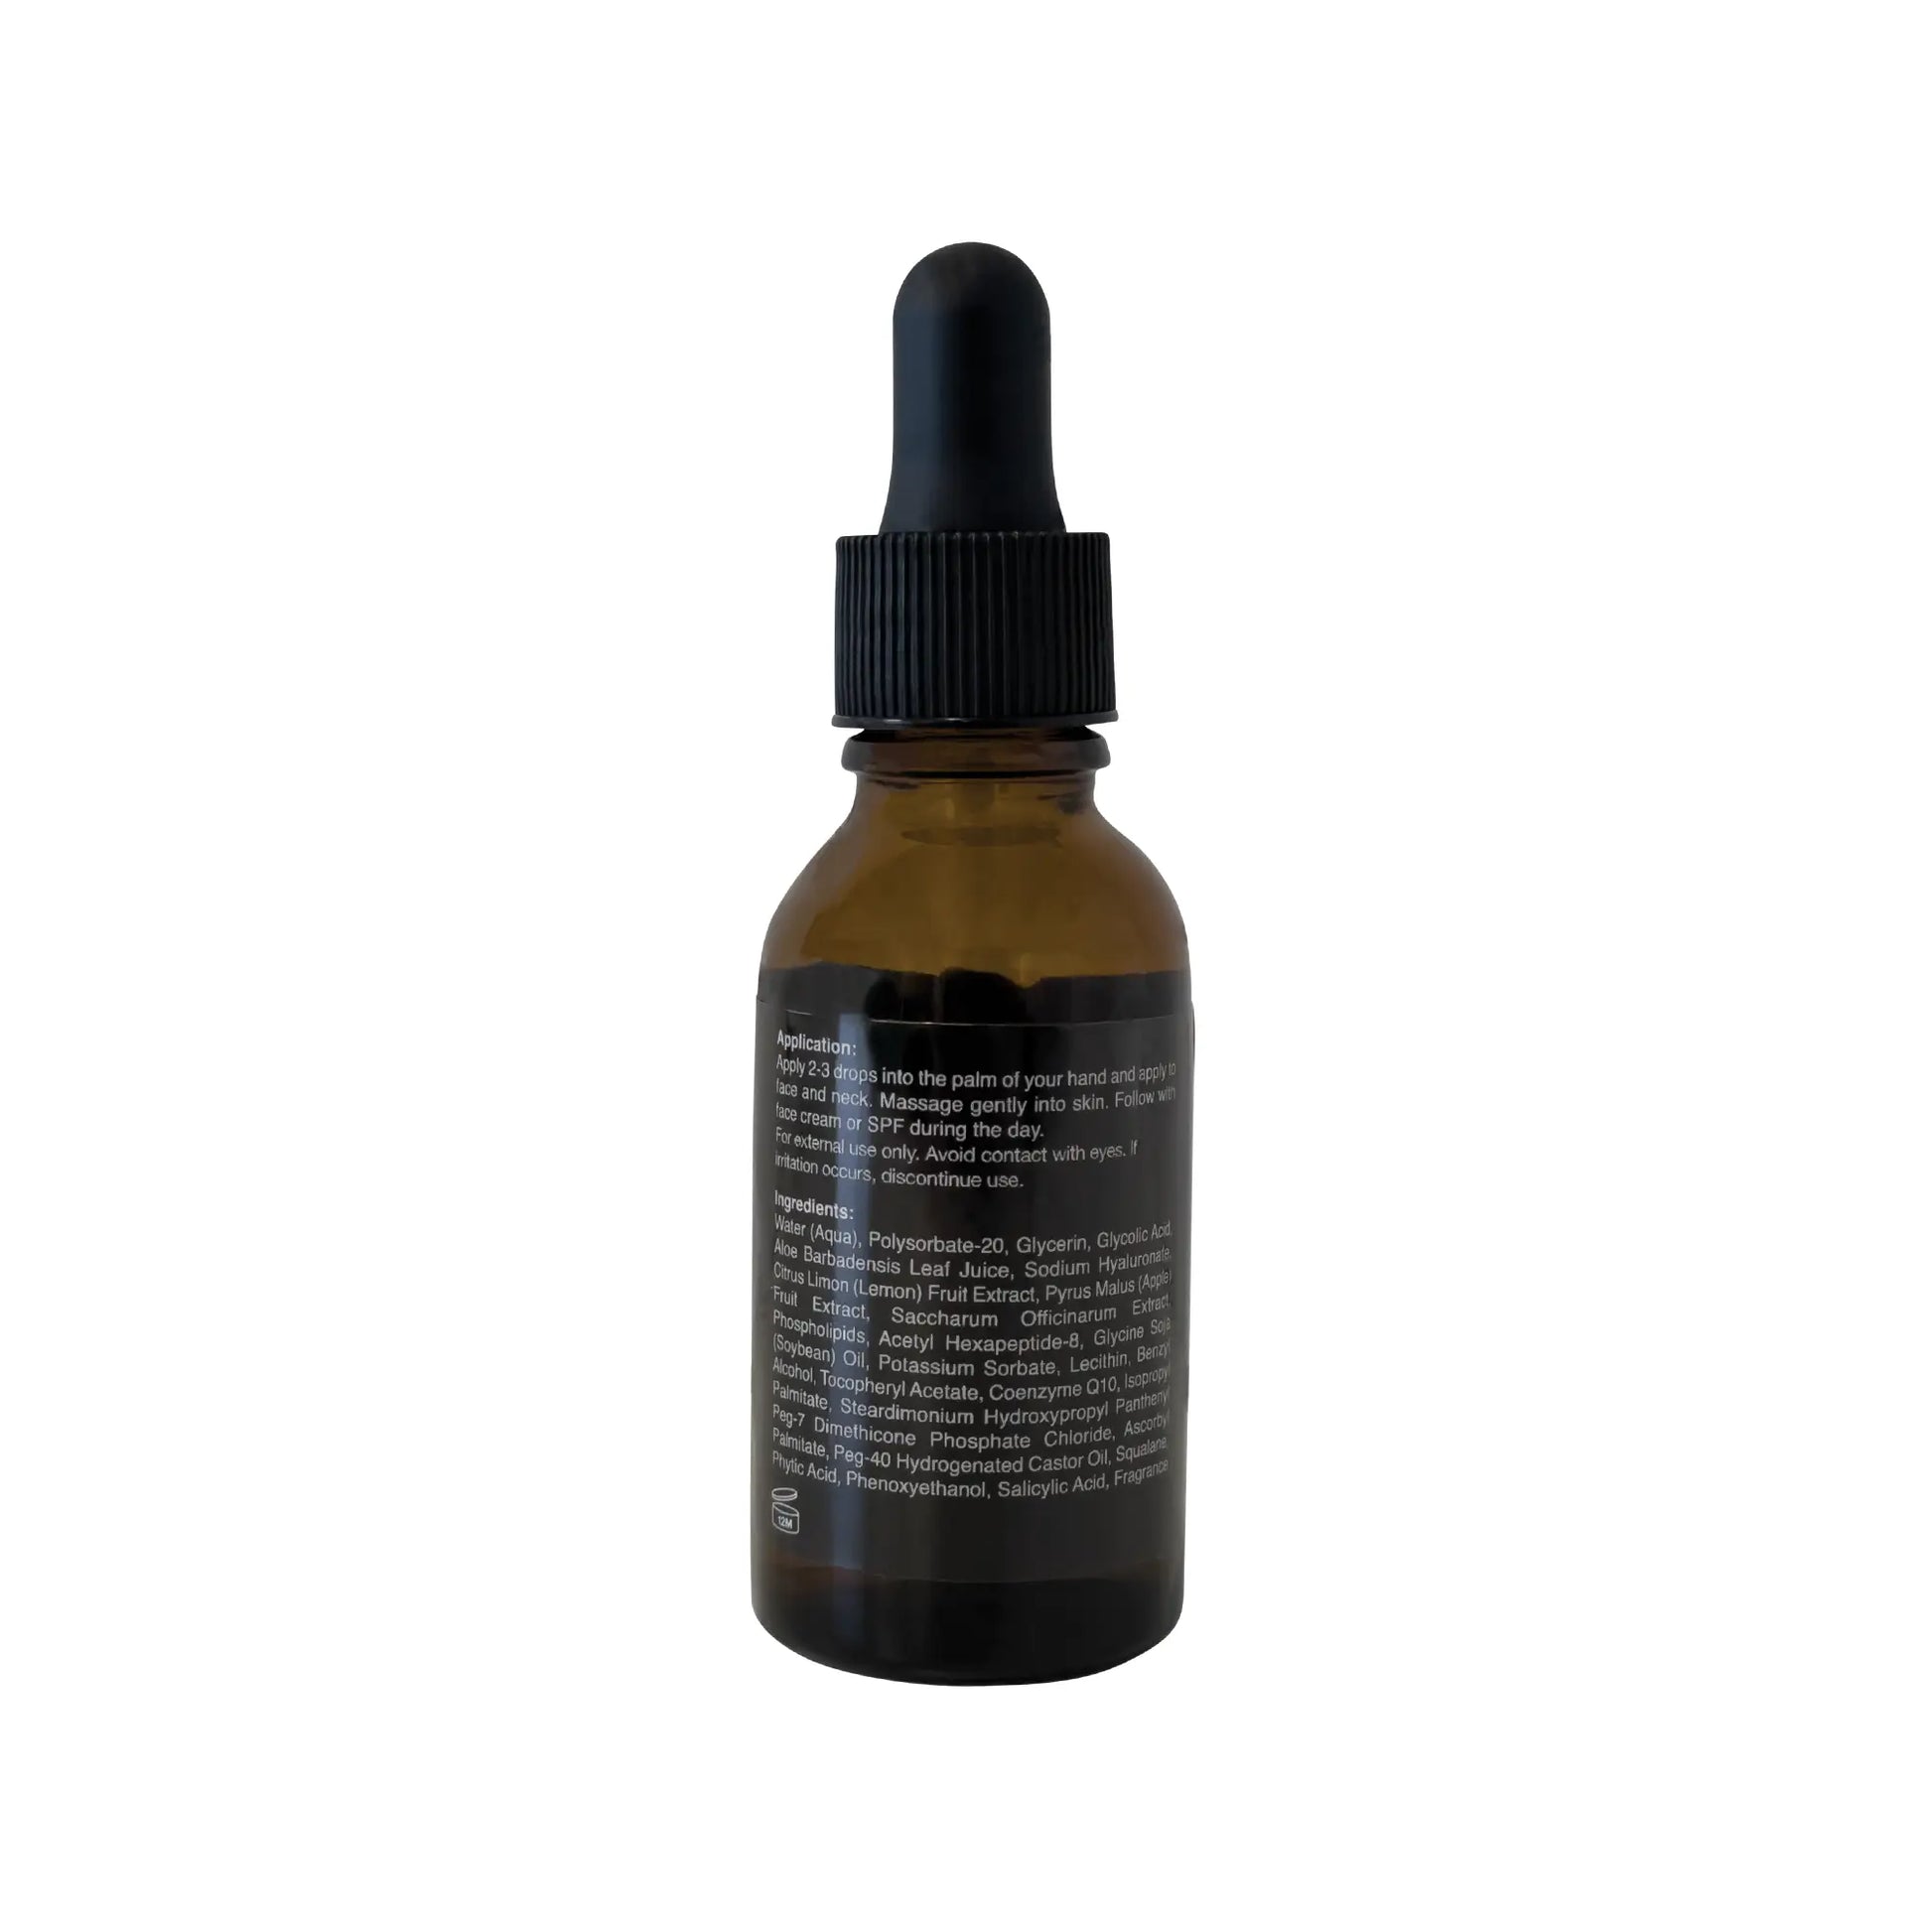 Cruisin Organics Glycolic Acid Serum.  A gentle yet fast-acting exfoliant that improves your skin complexion. This potent serum expertly evens hyperpigmentation, smooths your skin tone, and refines skin texture. The use of glycerin provides a layer of nourishing hydration for an all-day supple feel to your skin. An addition of vitamin E provides antioxidant properties, while squalane locks in extreme moisture and hydration.